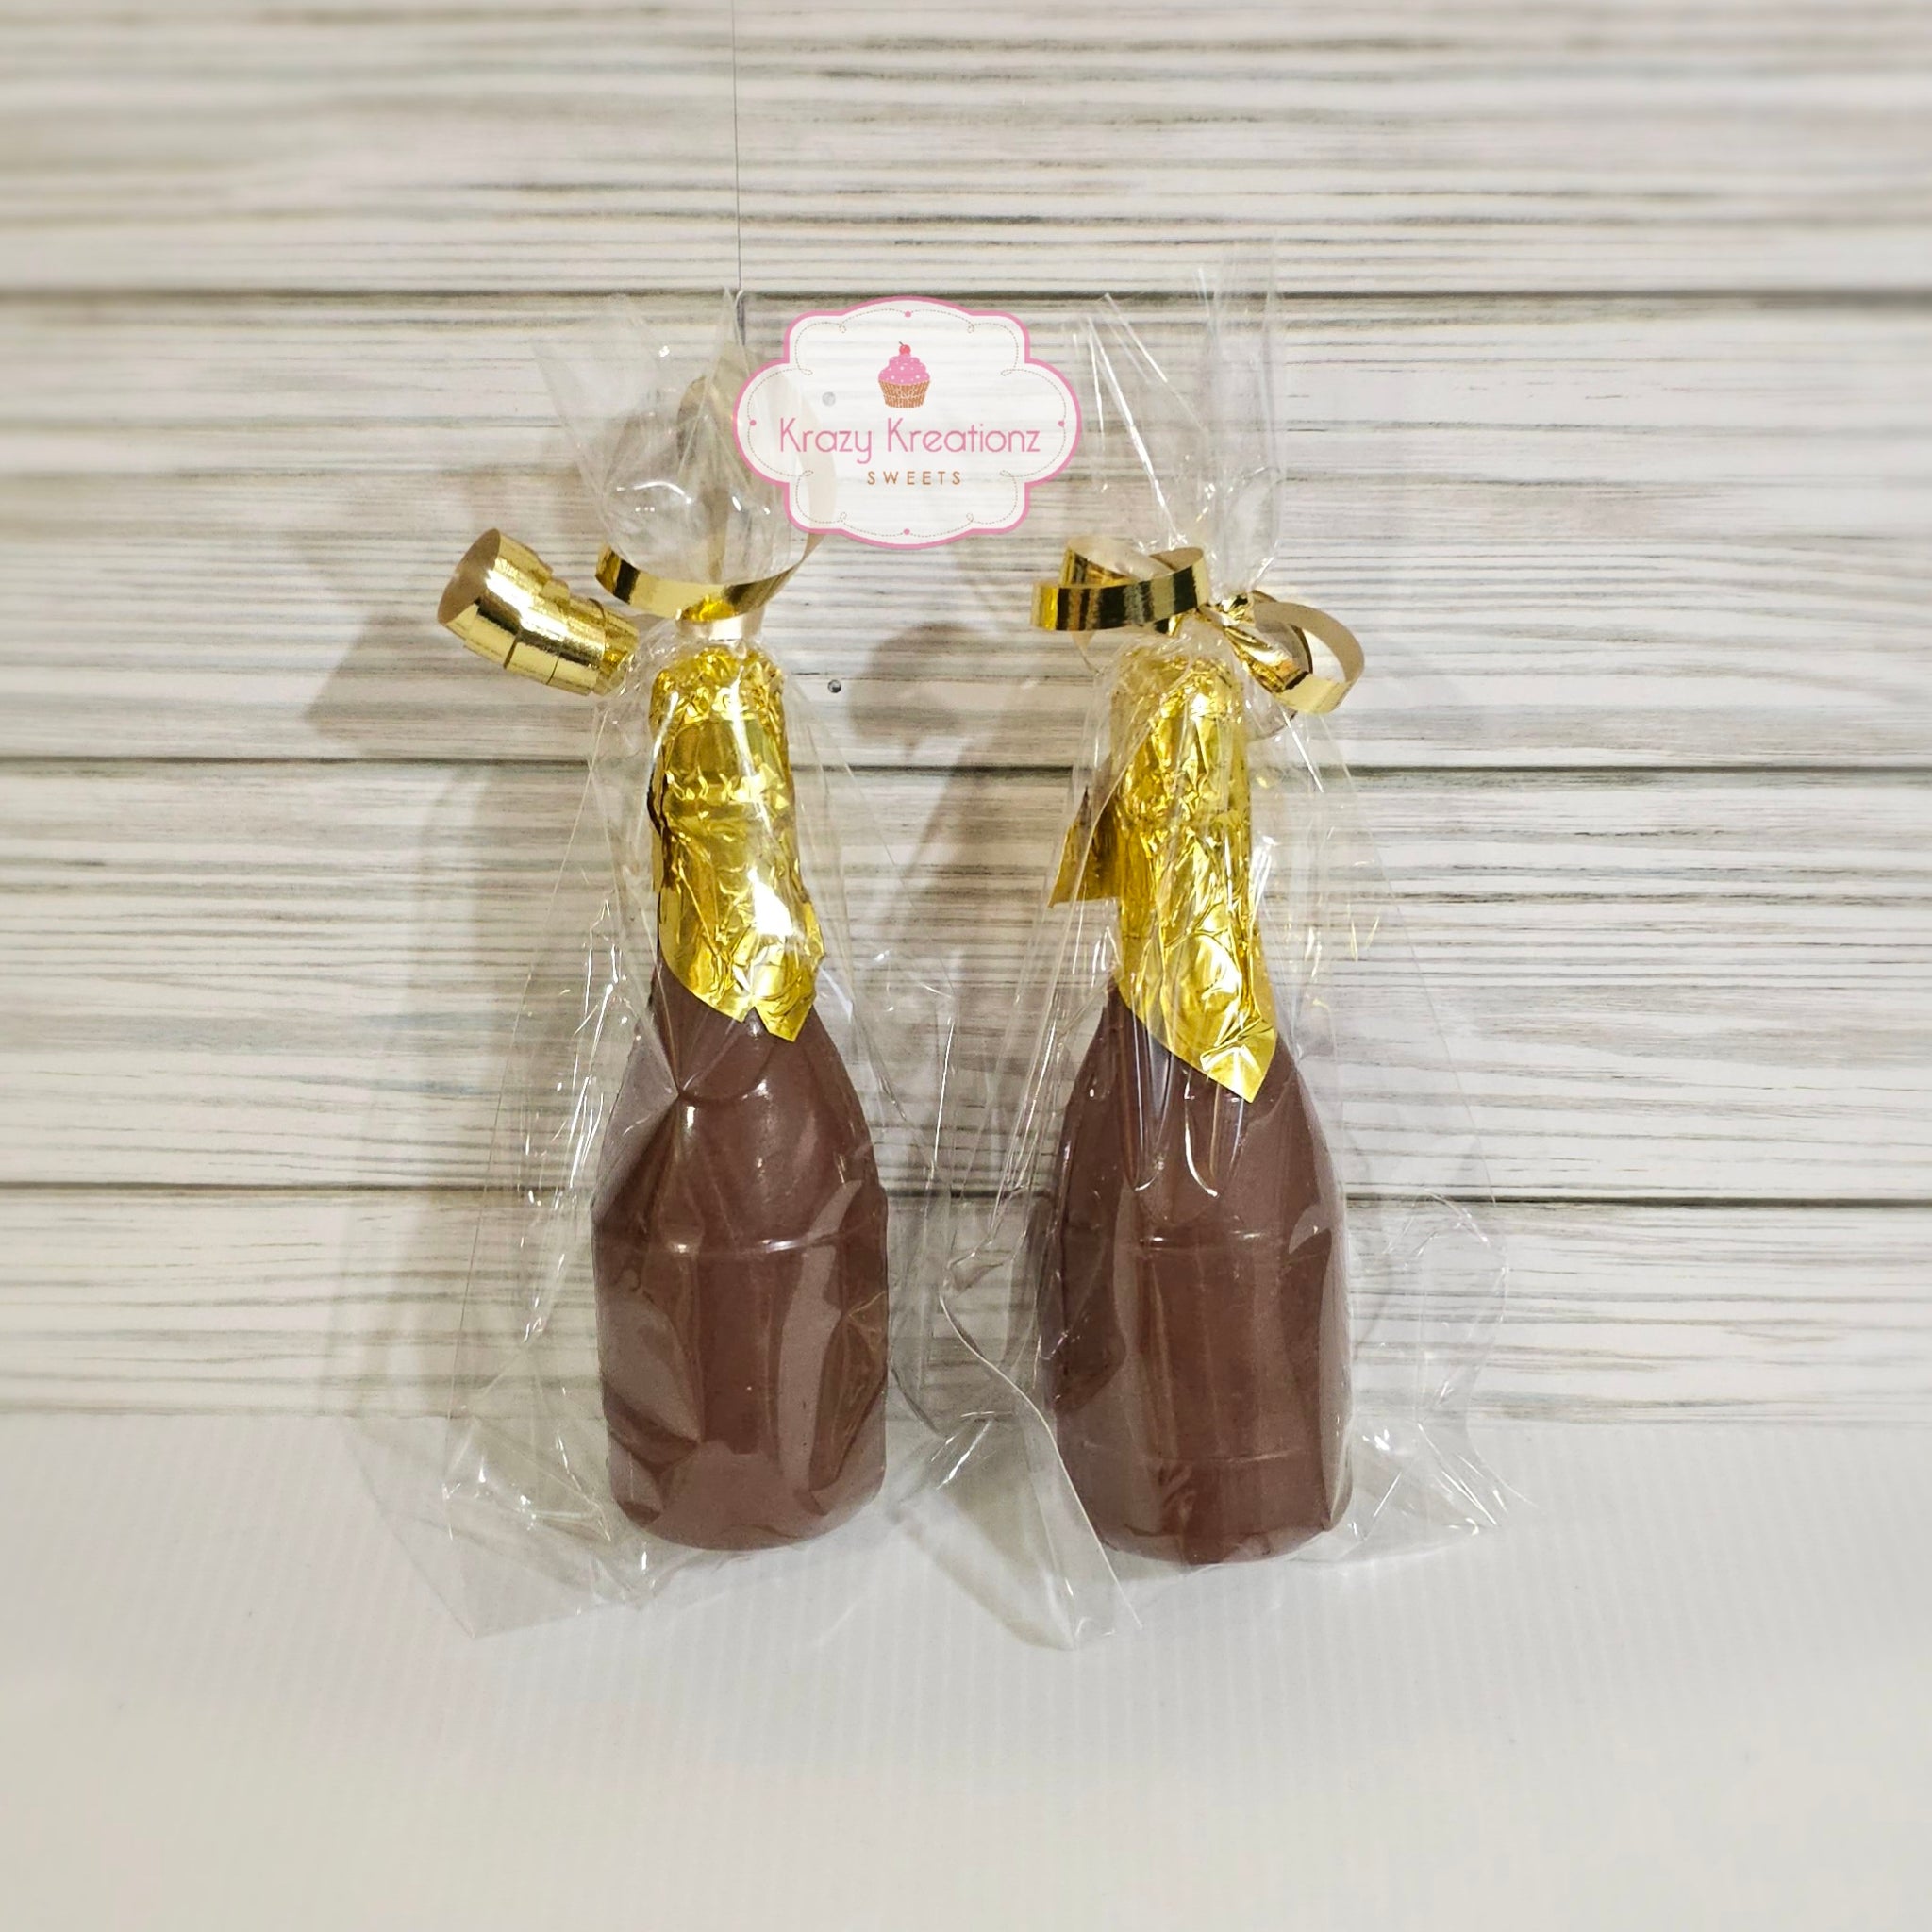 Chocolate Champagne Bottles